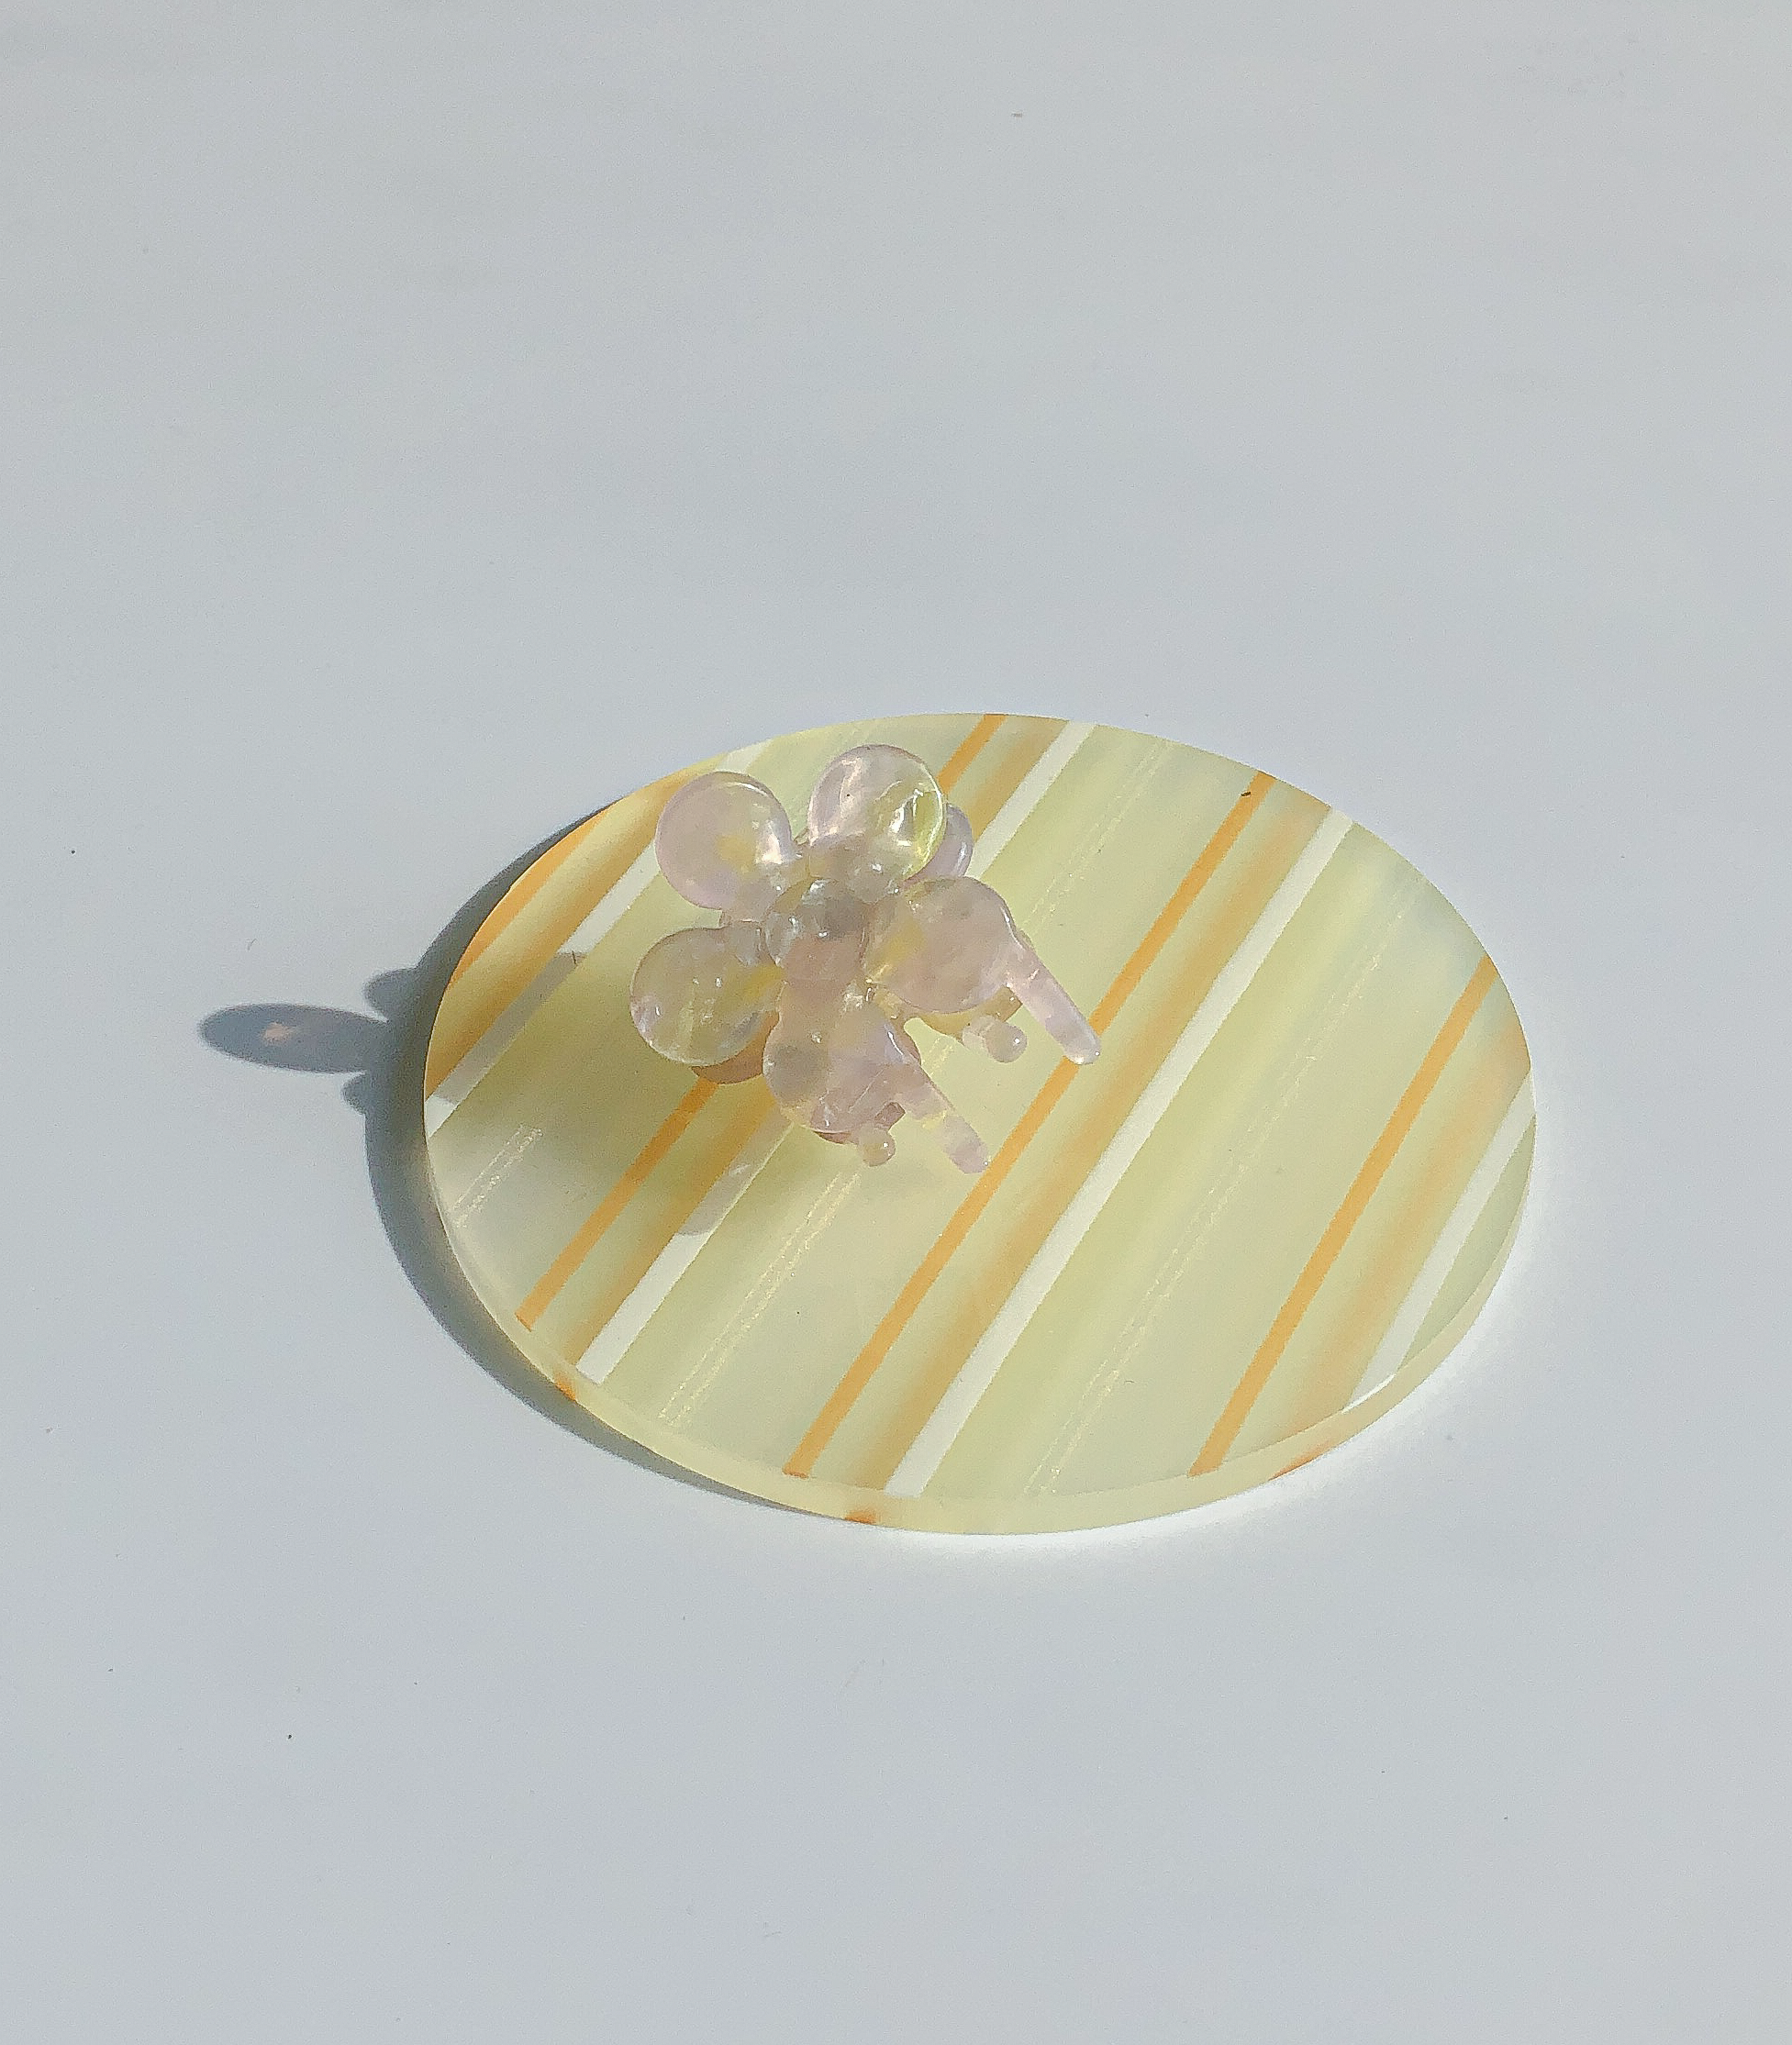 80s Acrylic Coasters in Lemon (8CM)  by PROSE Tabletop